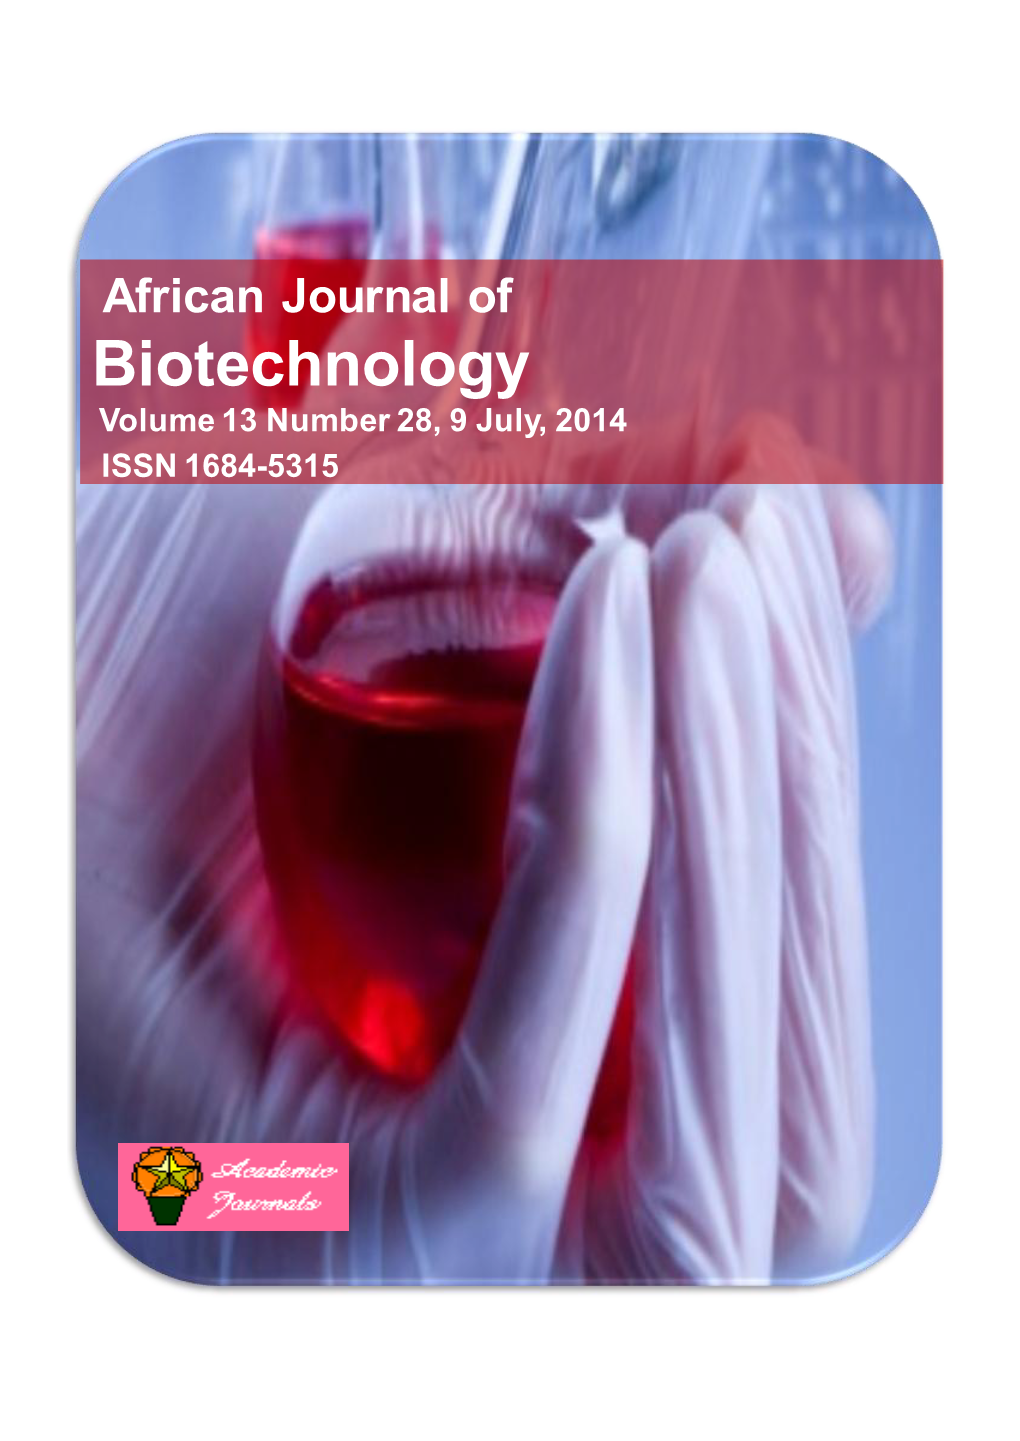 Biotechnology Volume 13 Number 28, 9 July, 2014 ISSN 1684-5315